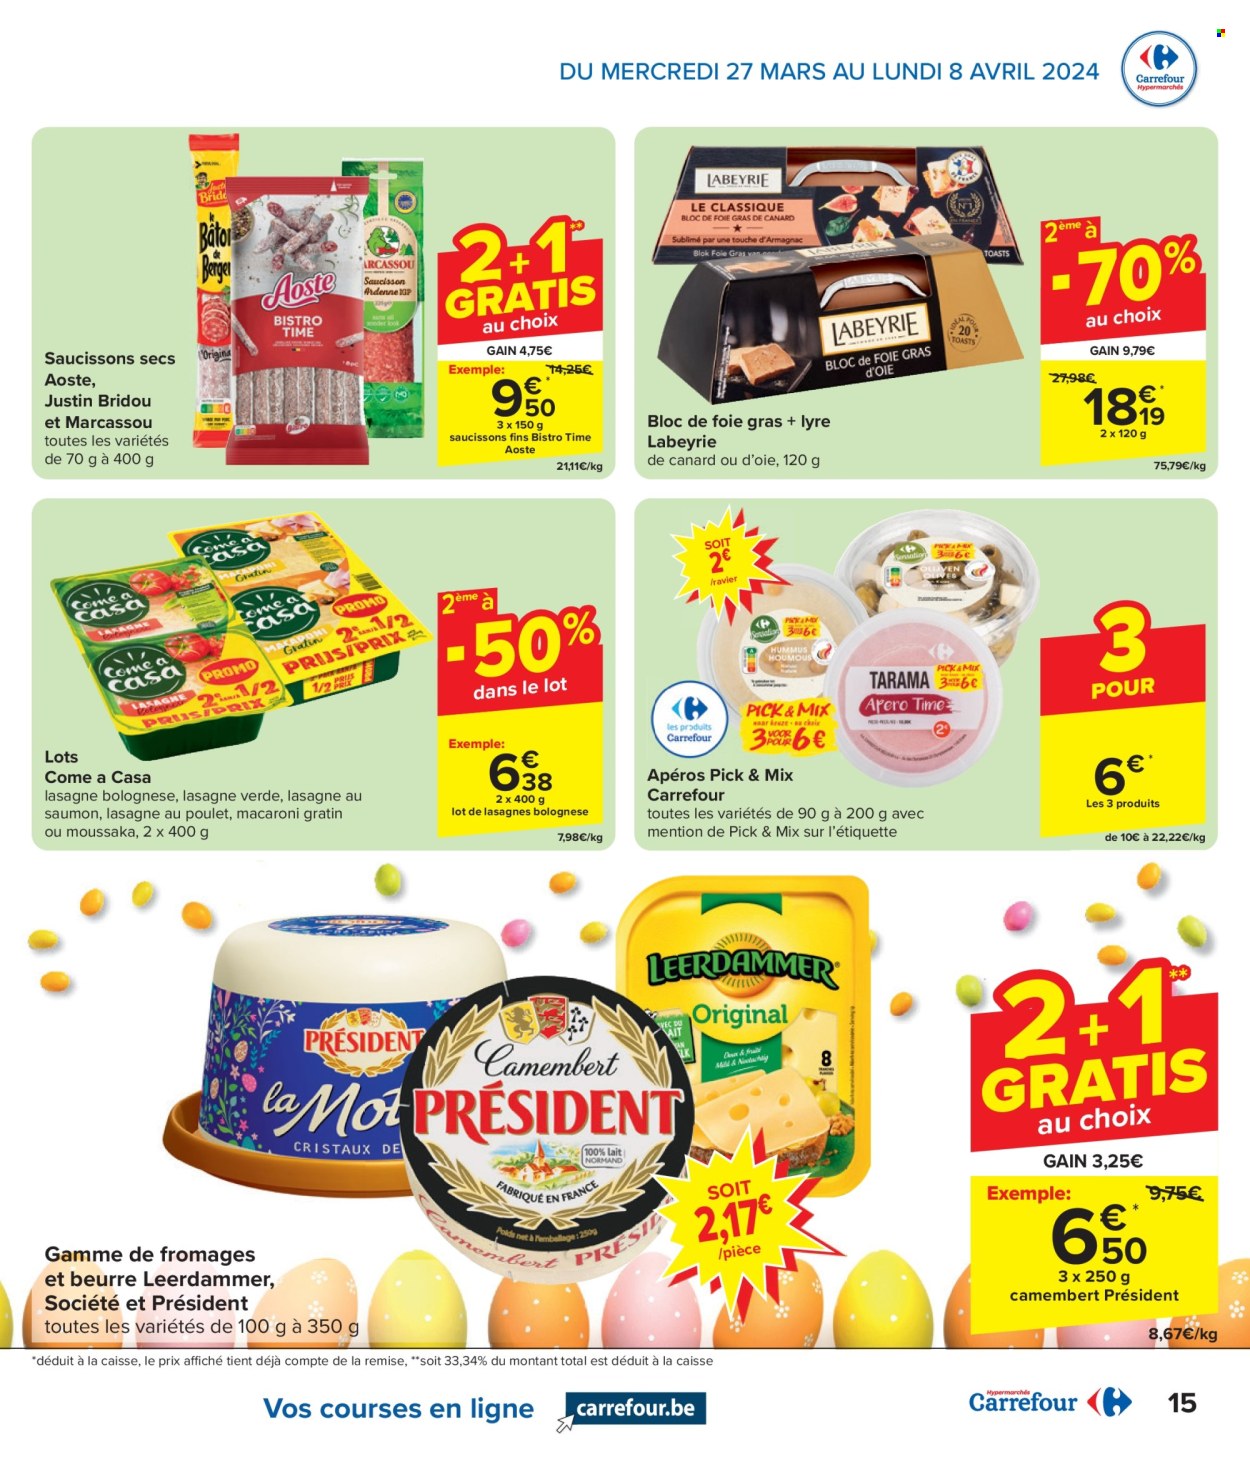 Catalogue Carrefour hypermarkt - 27.3.2024 - 8.4.2024. Page 15.